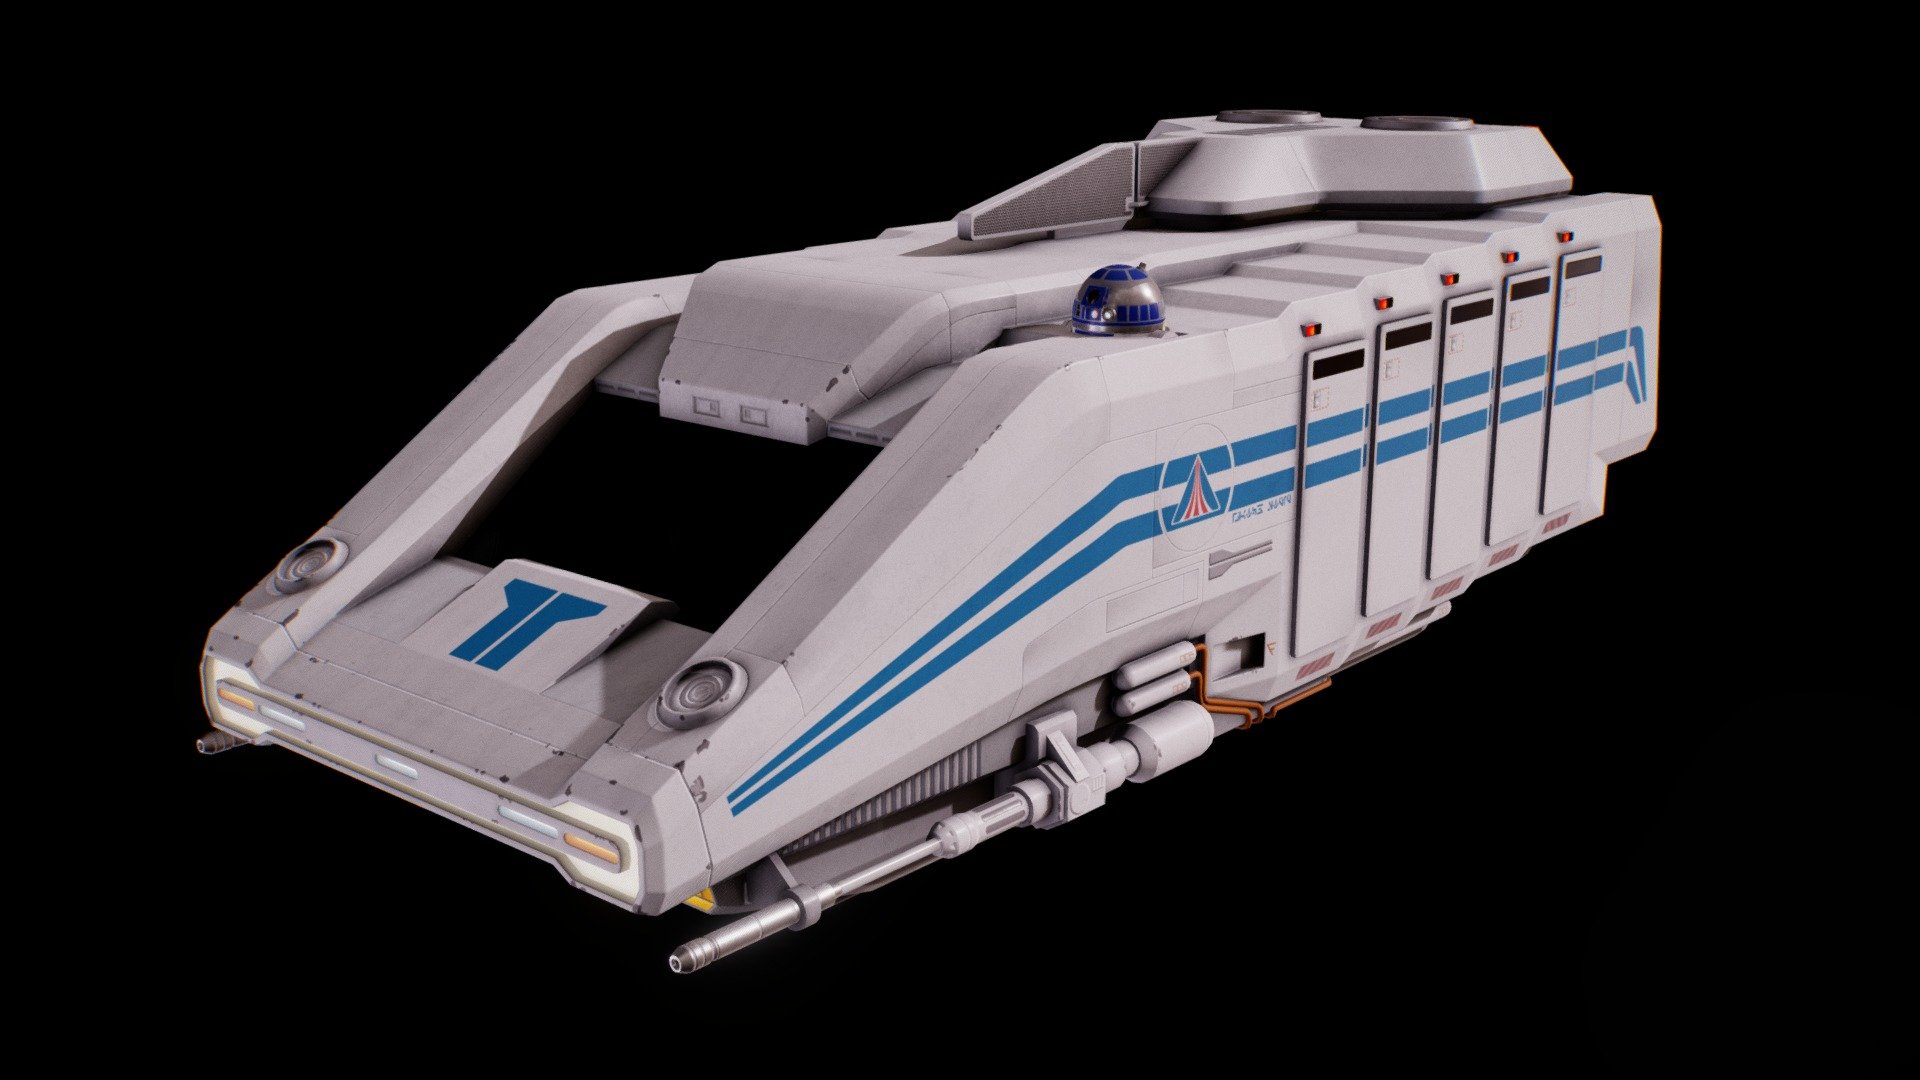 From the original 1987 hit Disneyland attraction Star Tours, the legendary StarSpeeder 3000!

The StarSpeeder 3000 was a transport spacecraft used by the Star Tours travel agency. It had room to carry up to 40 passengers. It is unknown what company designed the craft, but they were produced sometime around the Battle of Hoth.

The StarSpeeder 3000s were very similar to their predecessors, the StarSpeeder 1000s, both in shape and equipment. The craft was still boxy, with a downwardly angled front side, and still featured the usual five automated doors on both starboard and portside. With its five seating rows, the 3000 could still be boarded by no more than forty passengers at a time. Like with the StarSpeeder 1000, an astromech droid was loaded in a socket at the bow of the ship 3d model